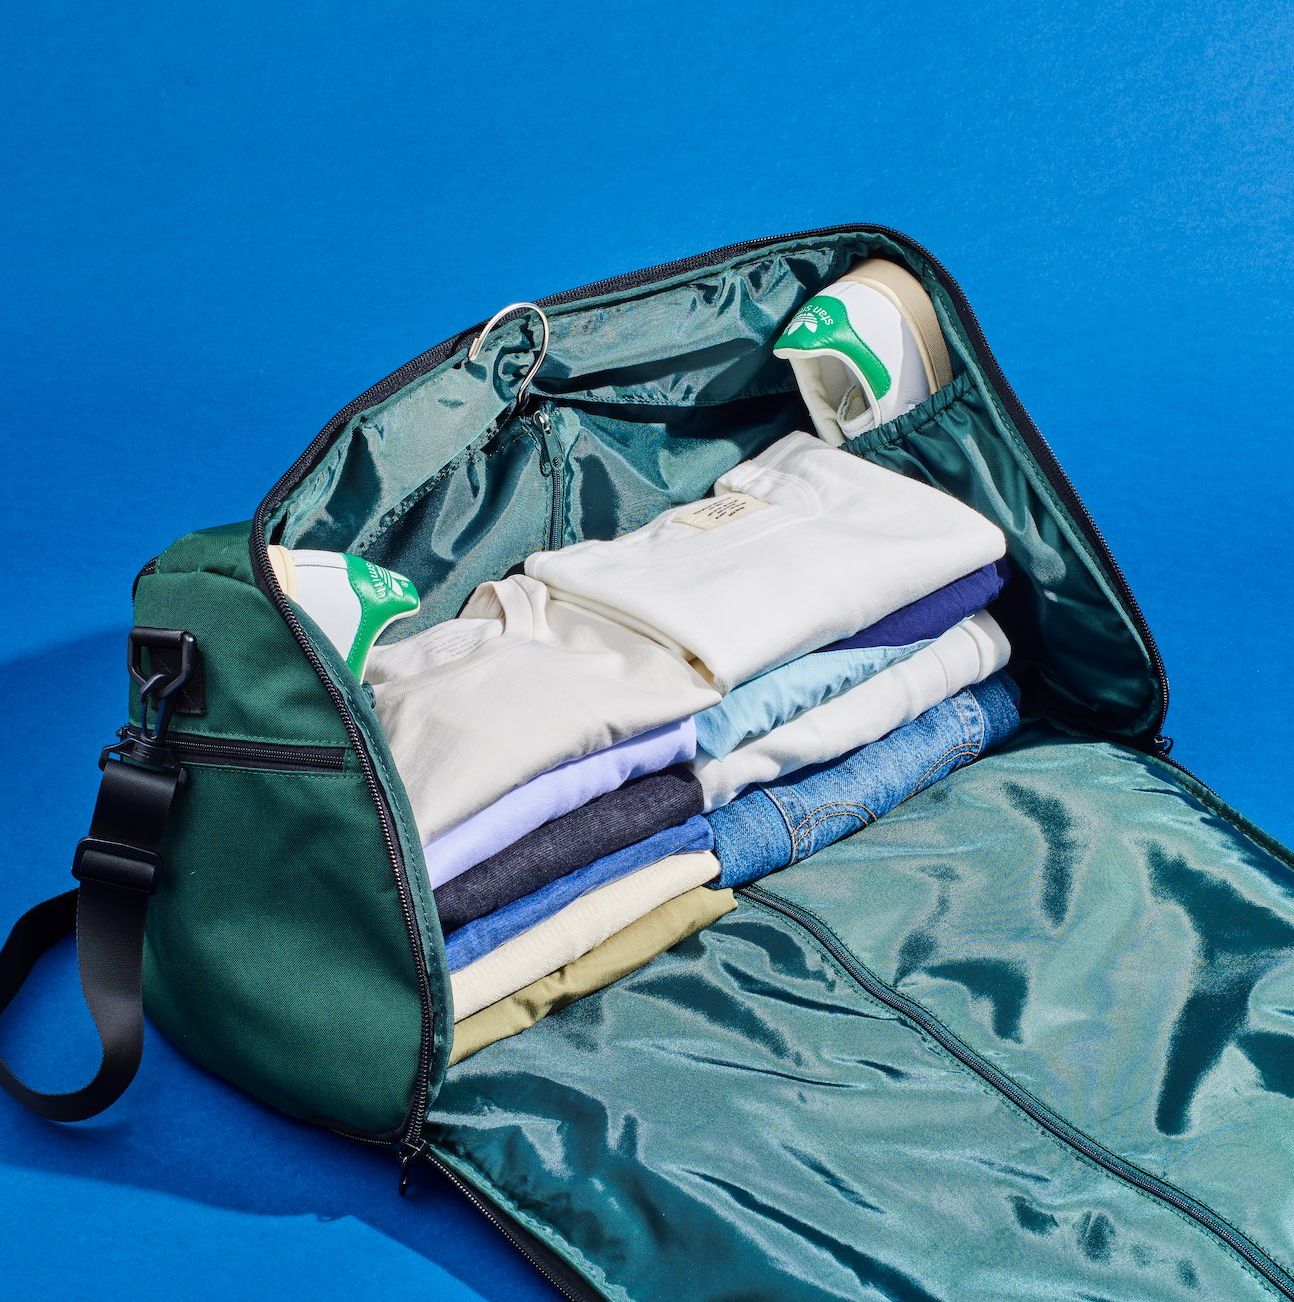 The Best Travel Bag Is Under $100